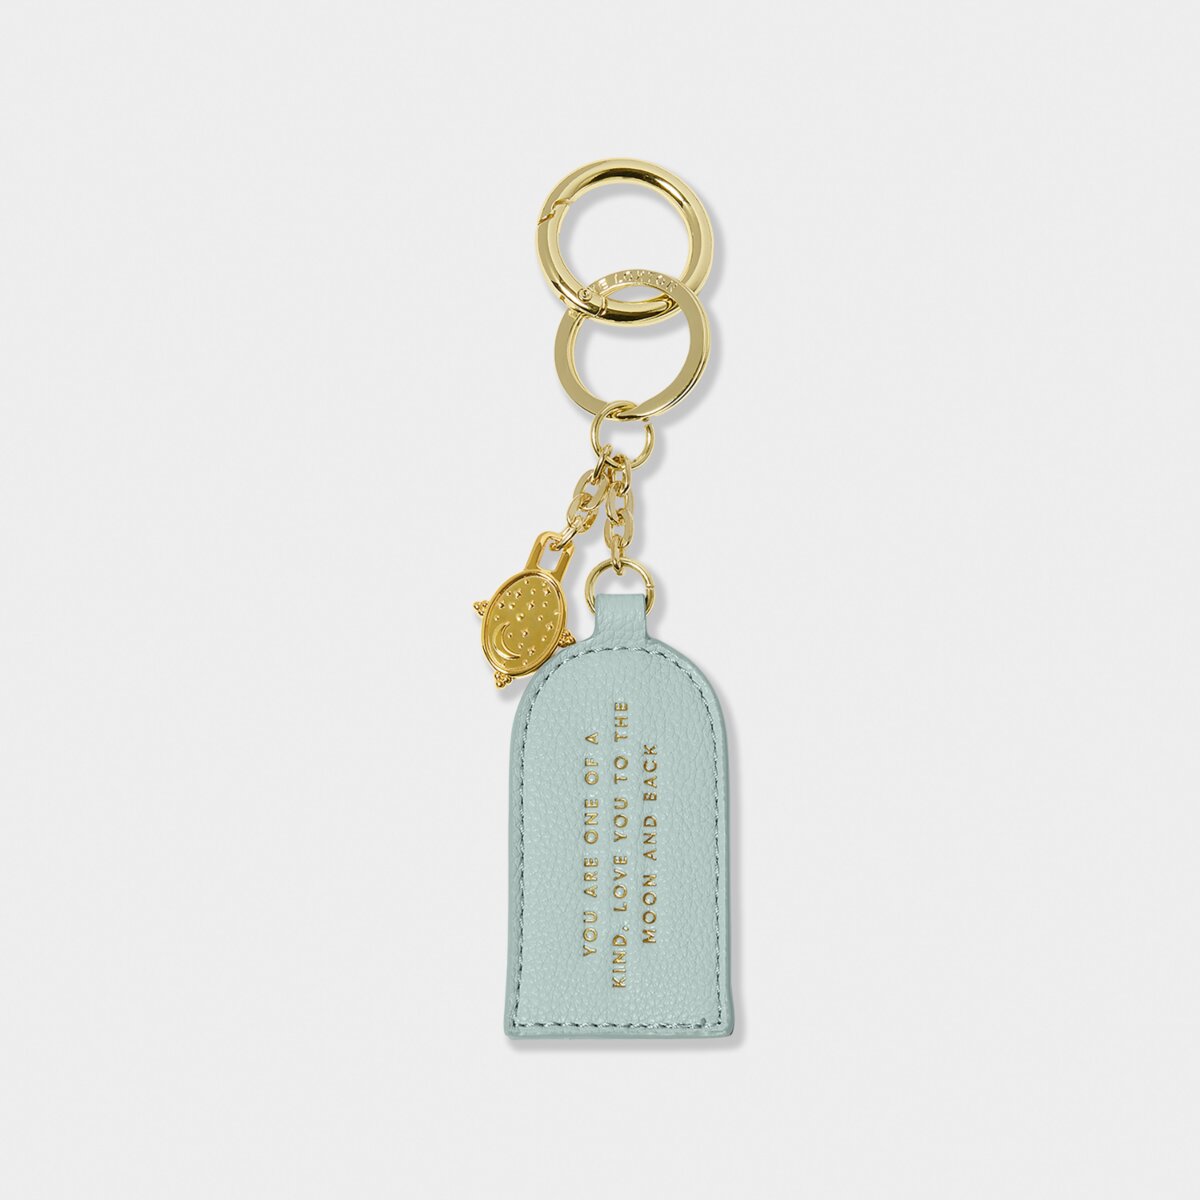 Pale blue keyring with gold charm and gold hardware rings with gold foiled 'Love You To The Moon and Back' sentiment